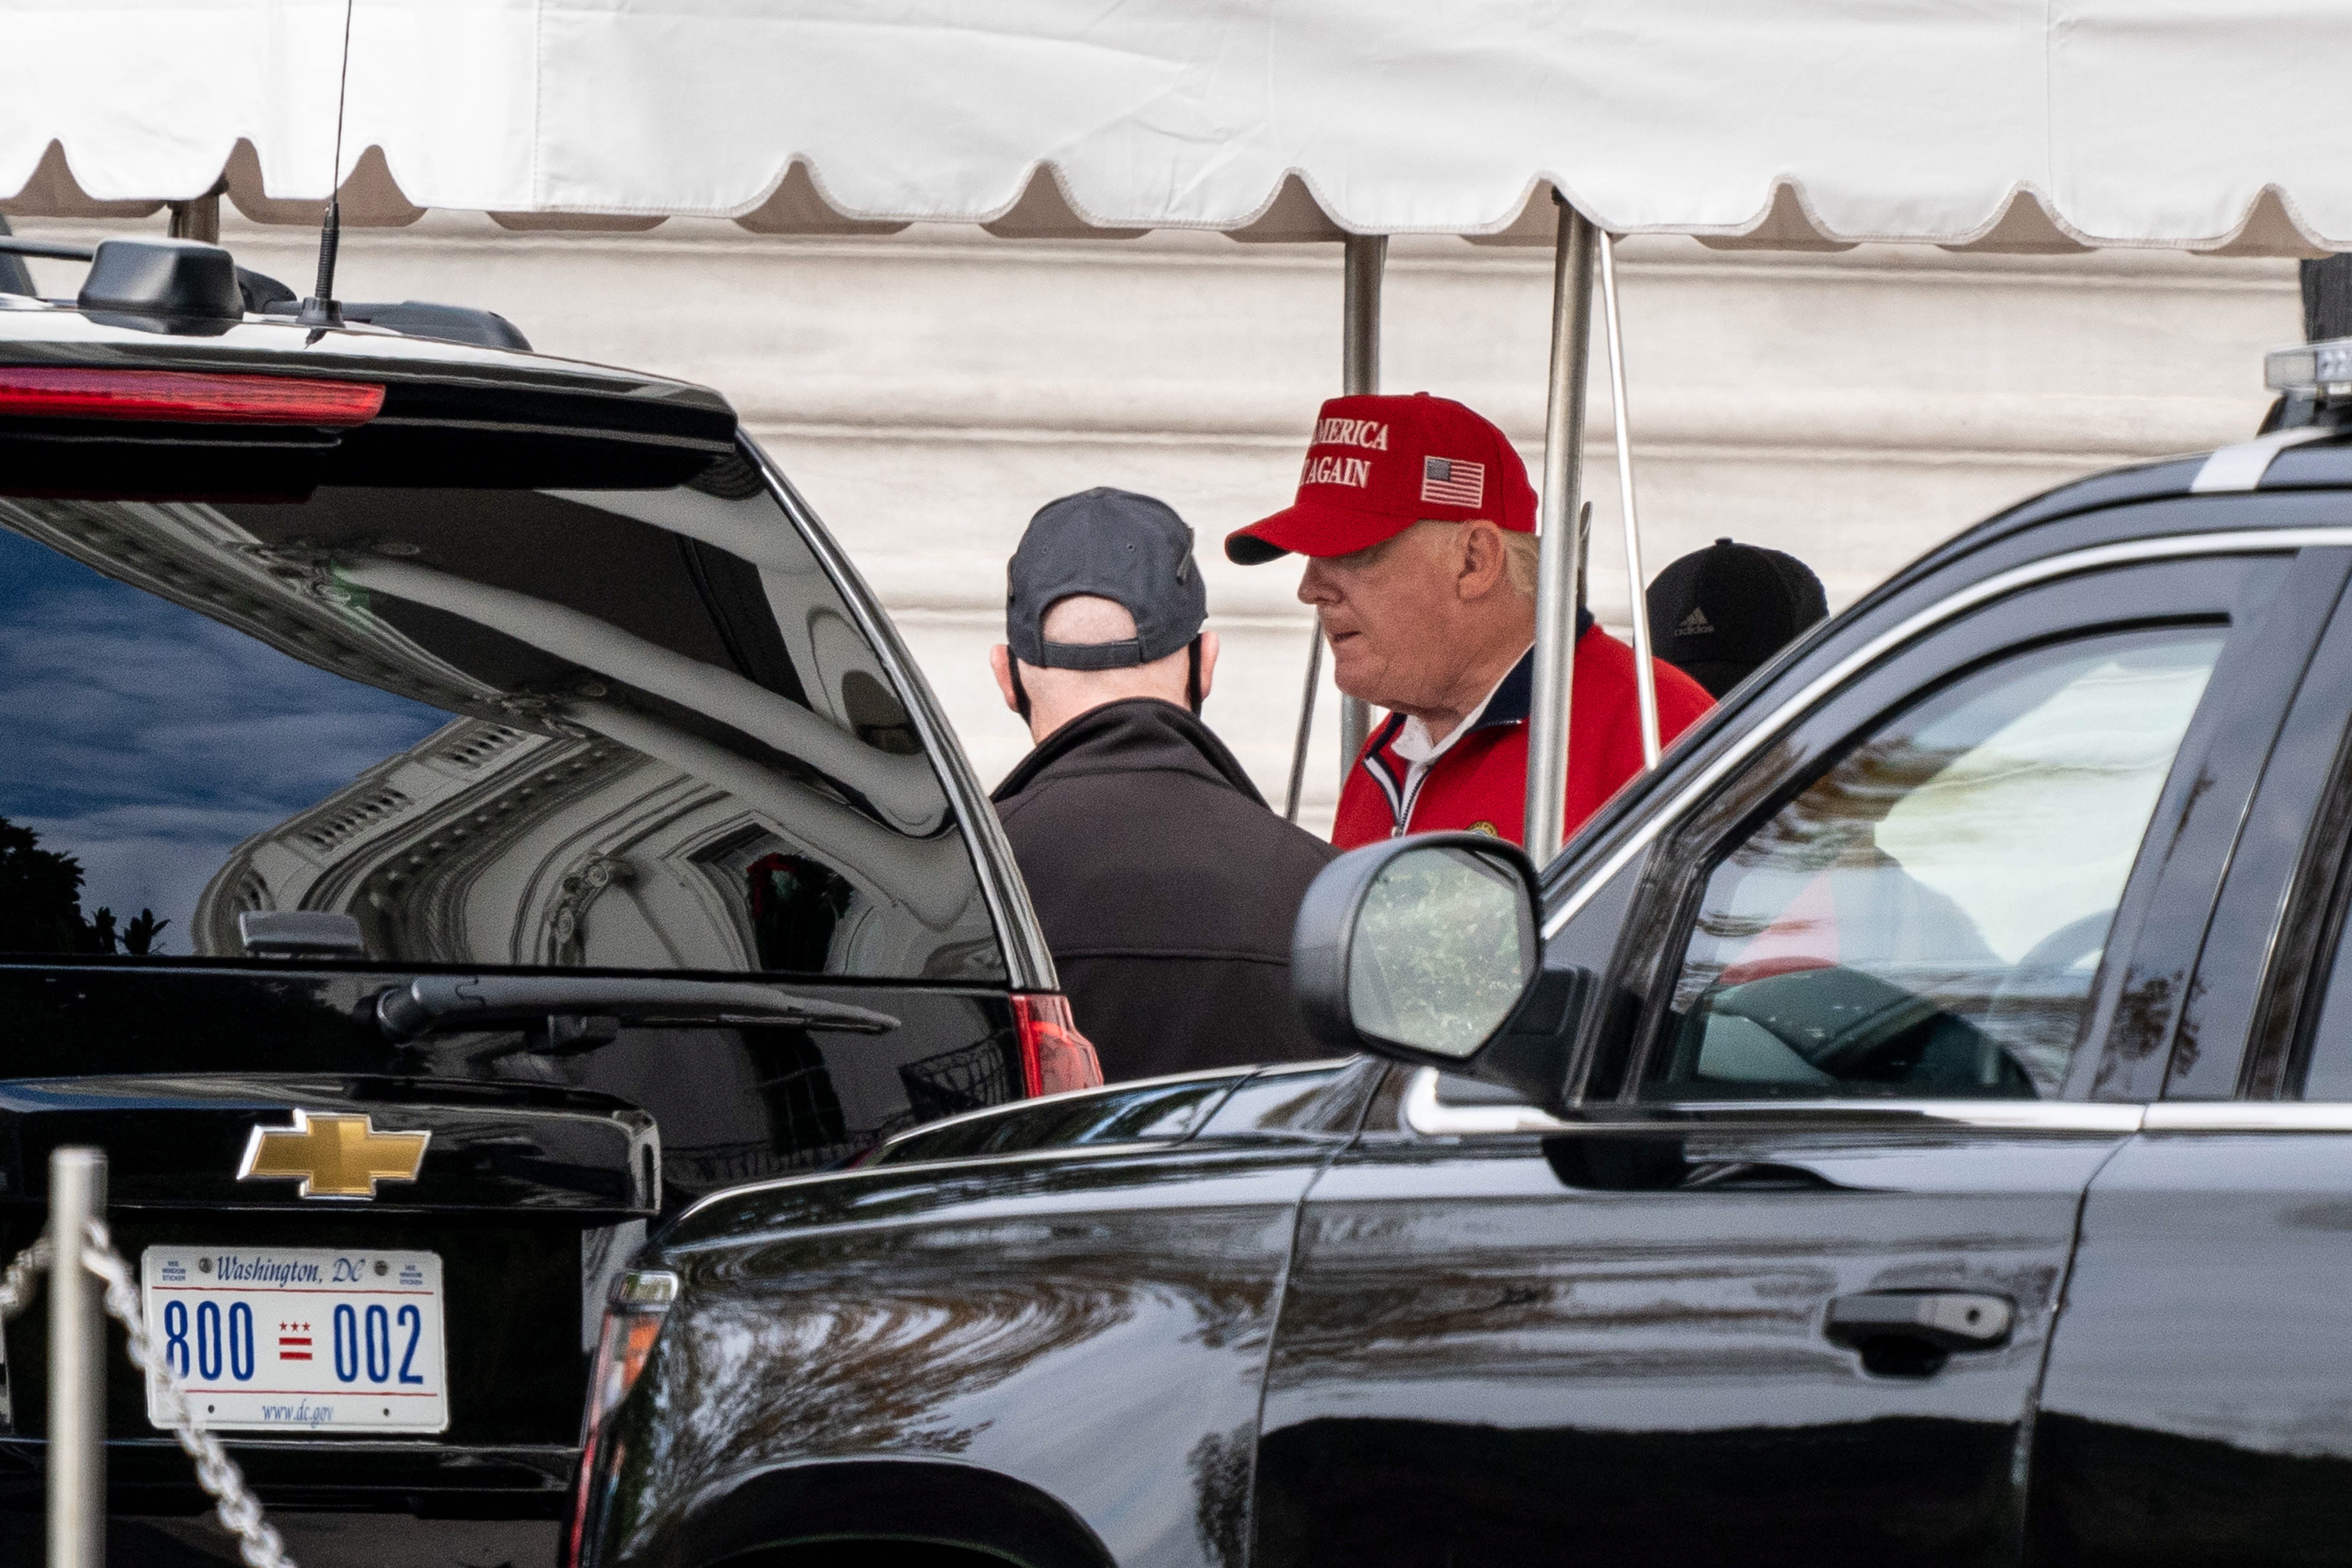 Donald J. Trump exits the White House to his motorcade on his way to Trump National Golf Club in Sterling, Virginia, USA, 27 November 2020. Trump is on his way to Camp David. EPA/KEN CEDENO / POOL